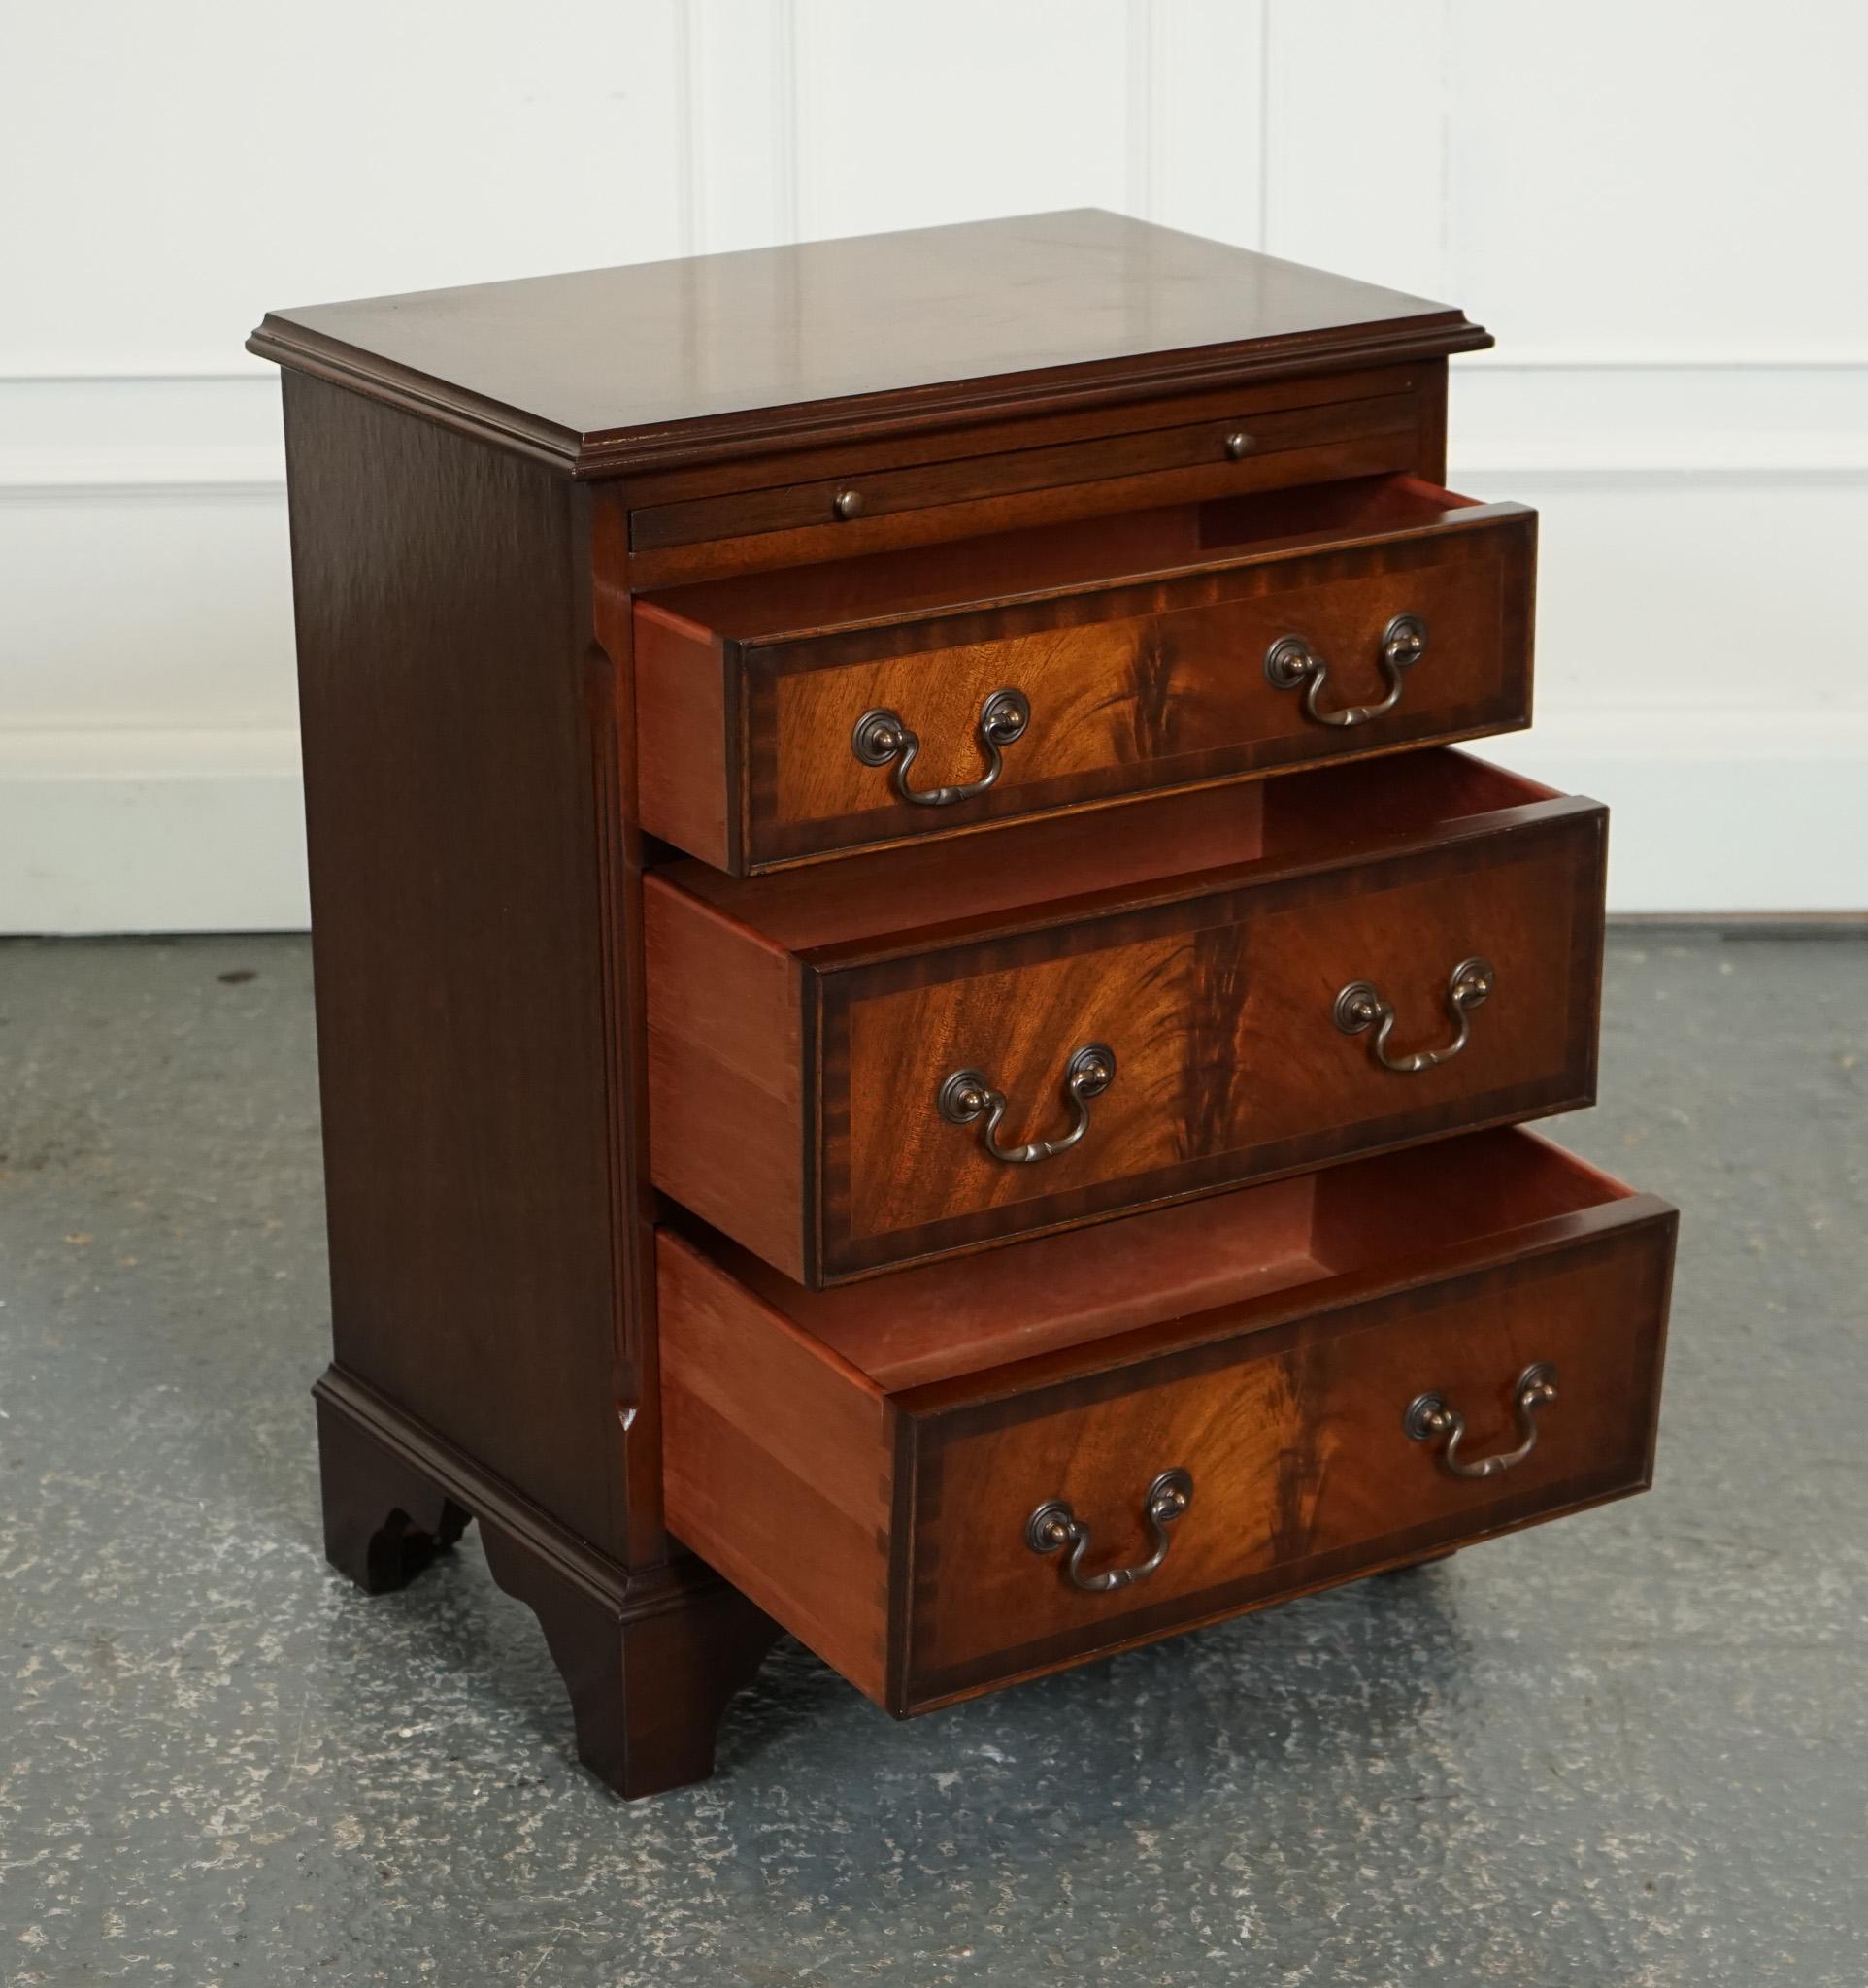 
We are delighted to offer for sale this Georgian Style Three Drawer Chest Side Table With Butler Tray.

The Georgian style small chest of drawers side table with Butler tray is a charming and versatile piece of furniture that adds a touch of